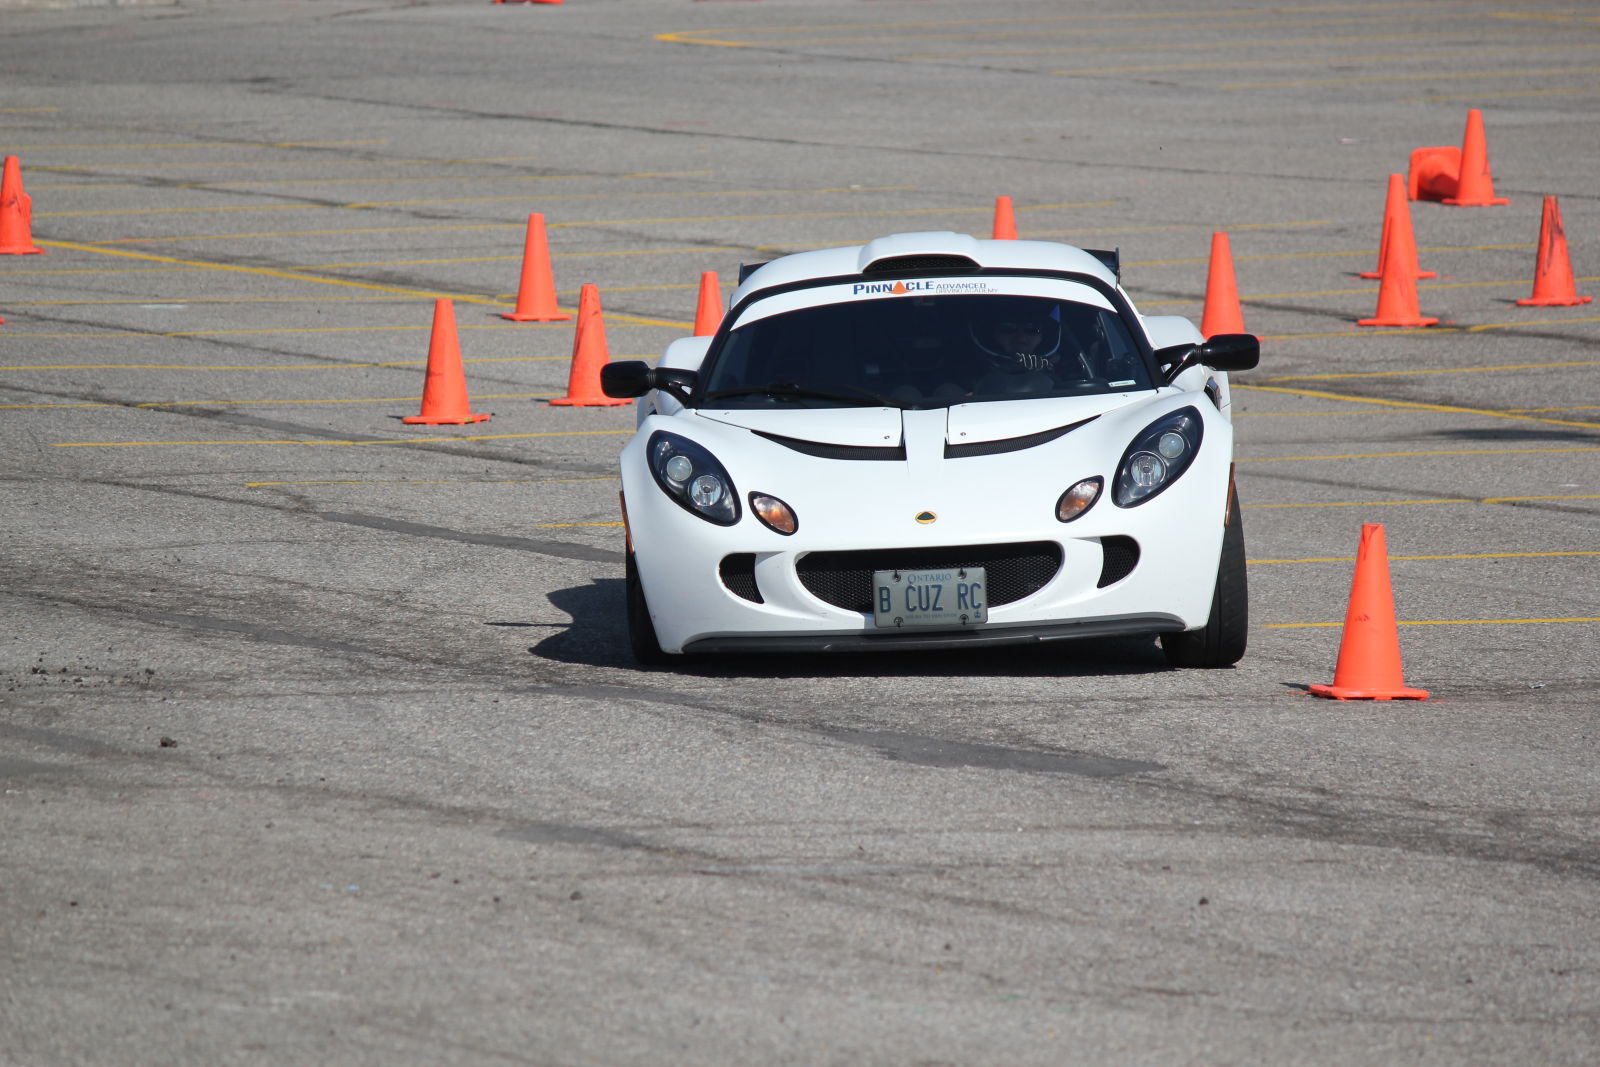 This guy just sold this Exige &amp; will run an Evora 400 next year.